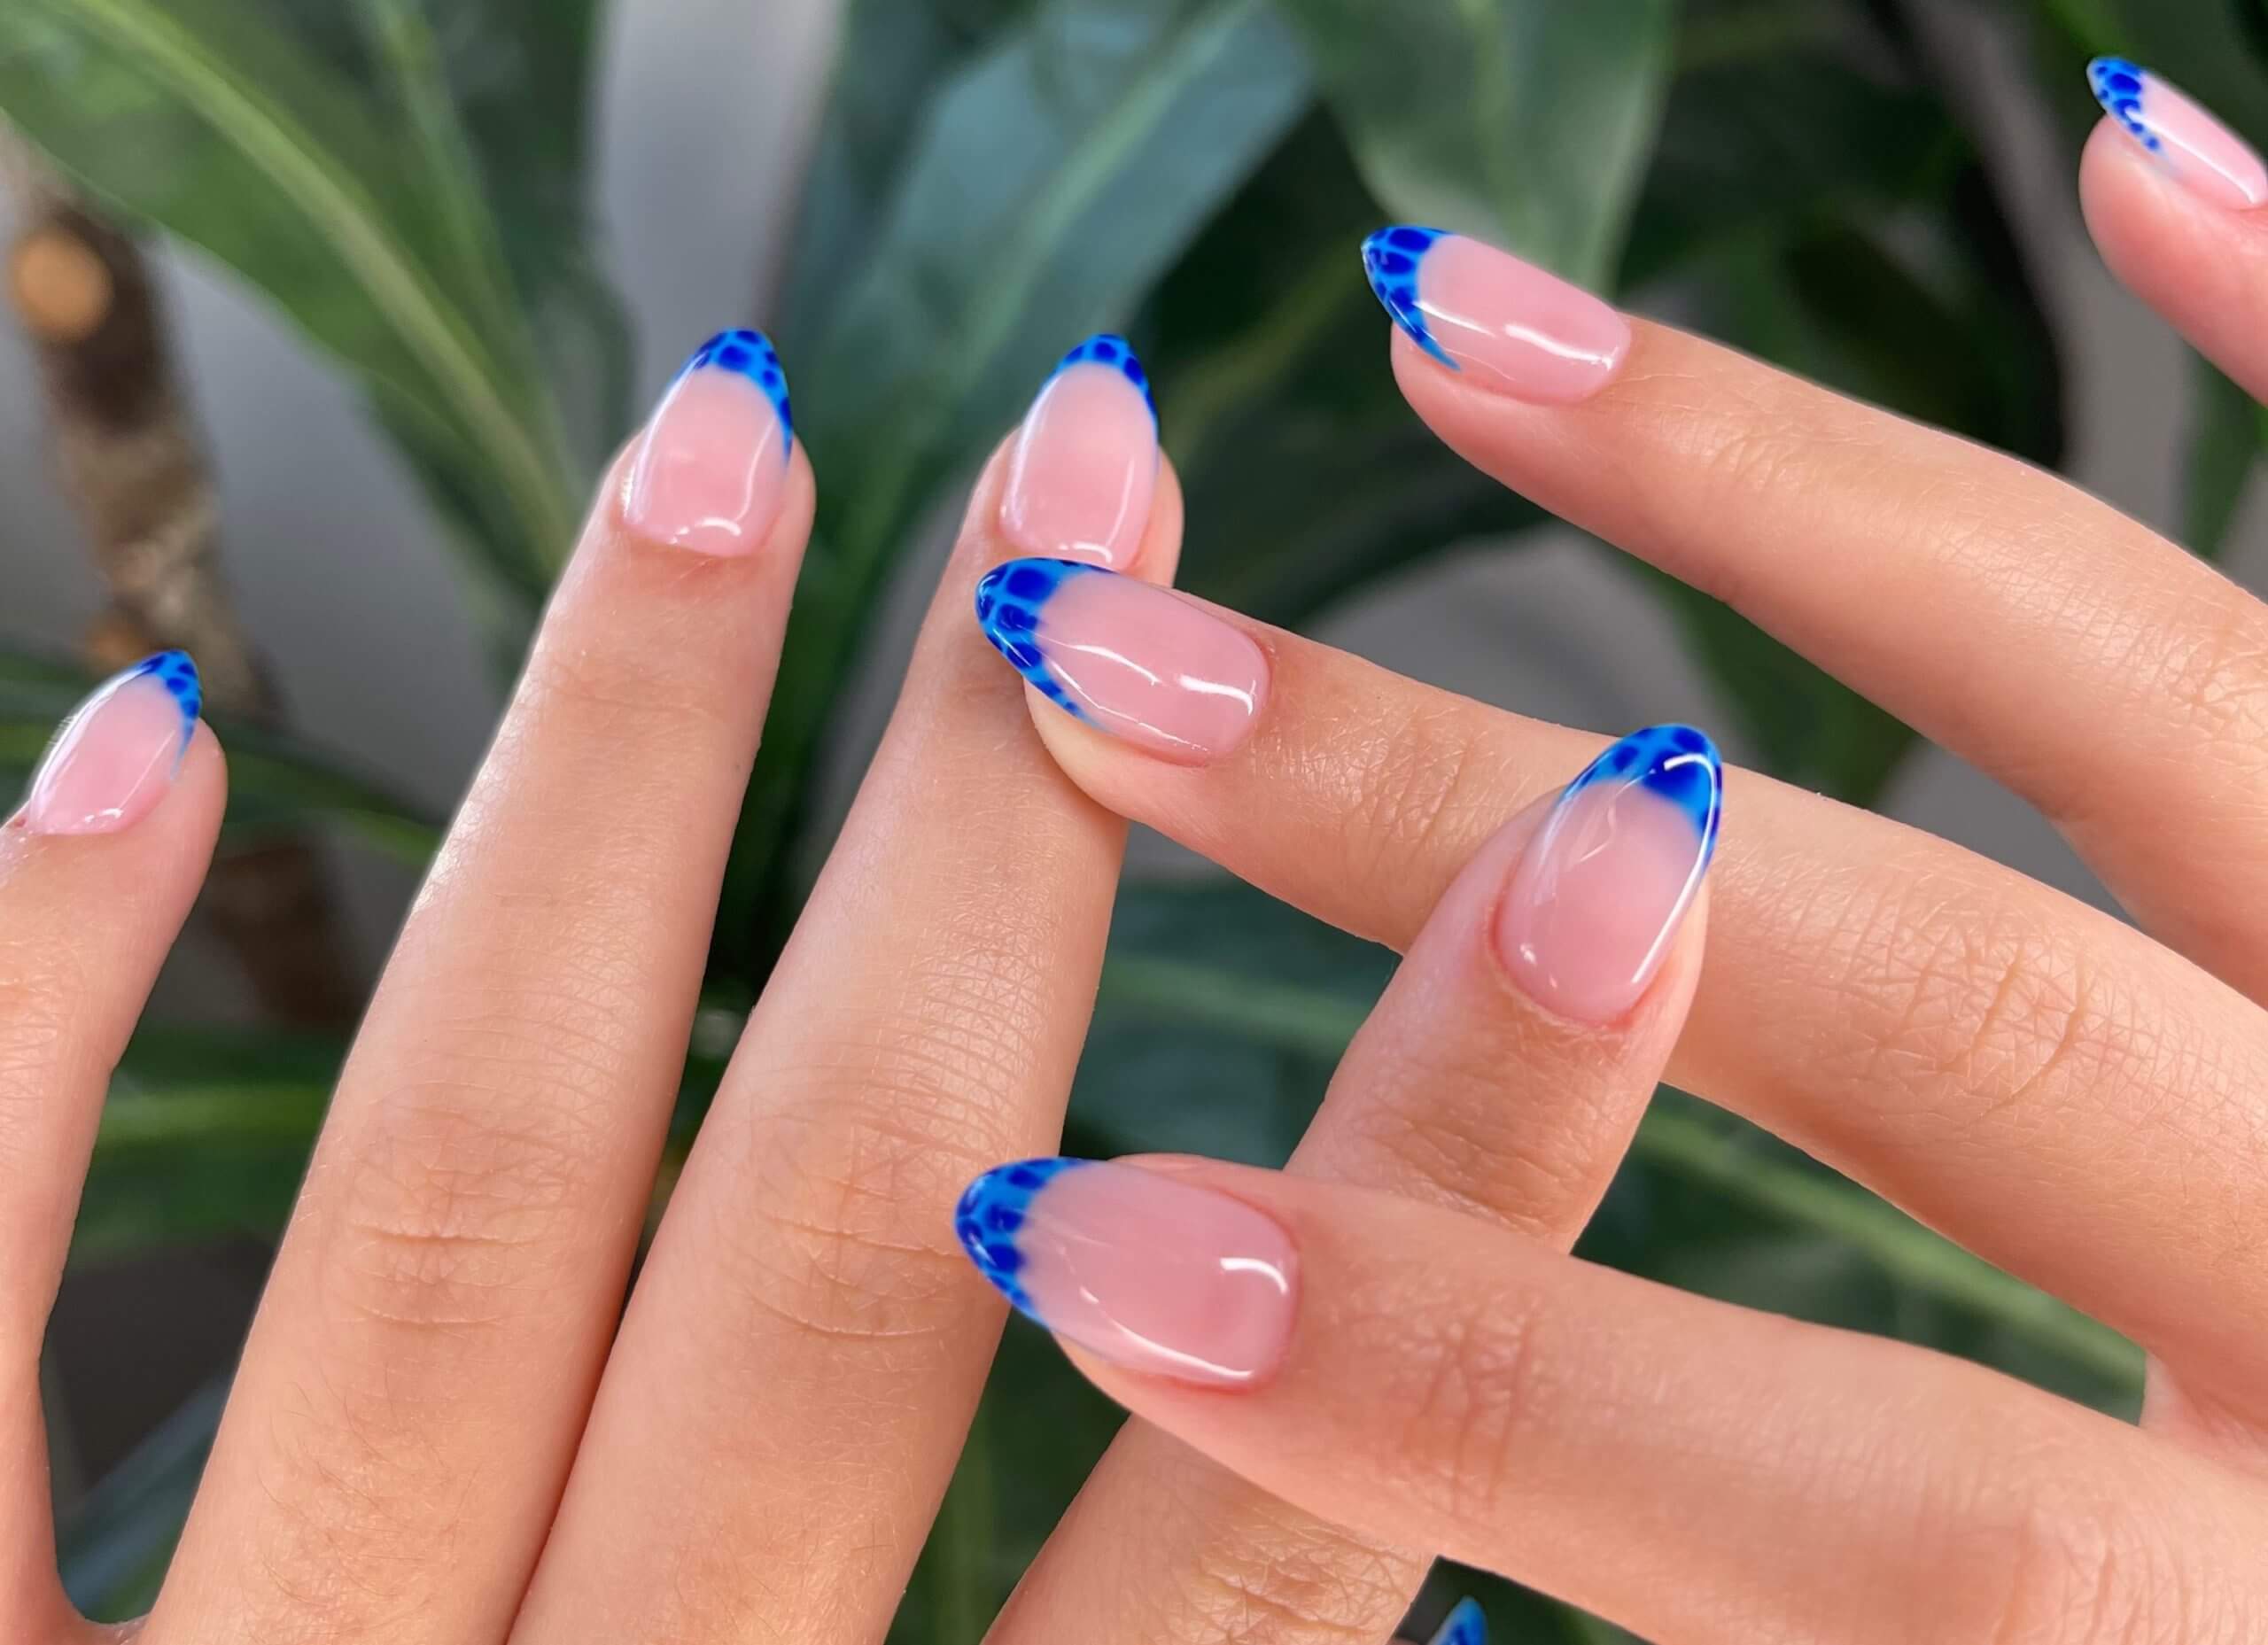 4. Fast and Fun Nail Designs to Try - wide 6